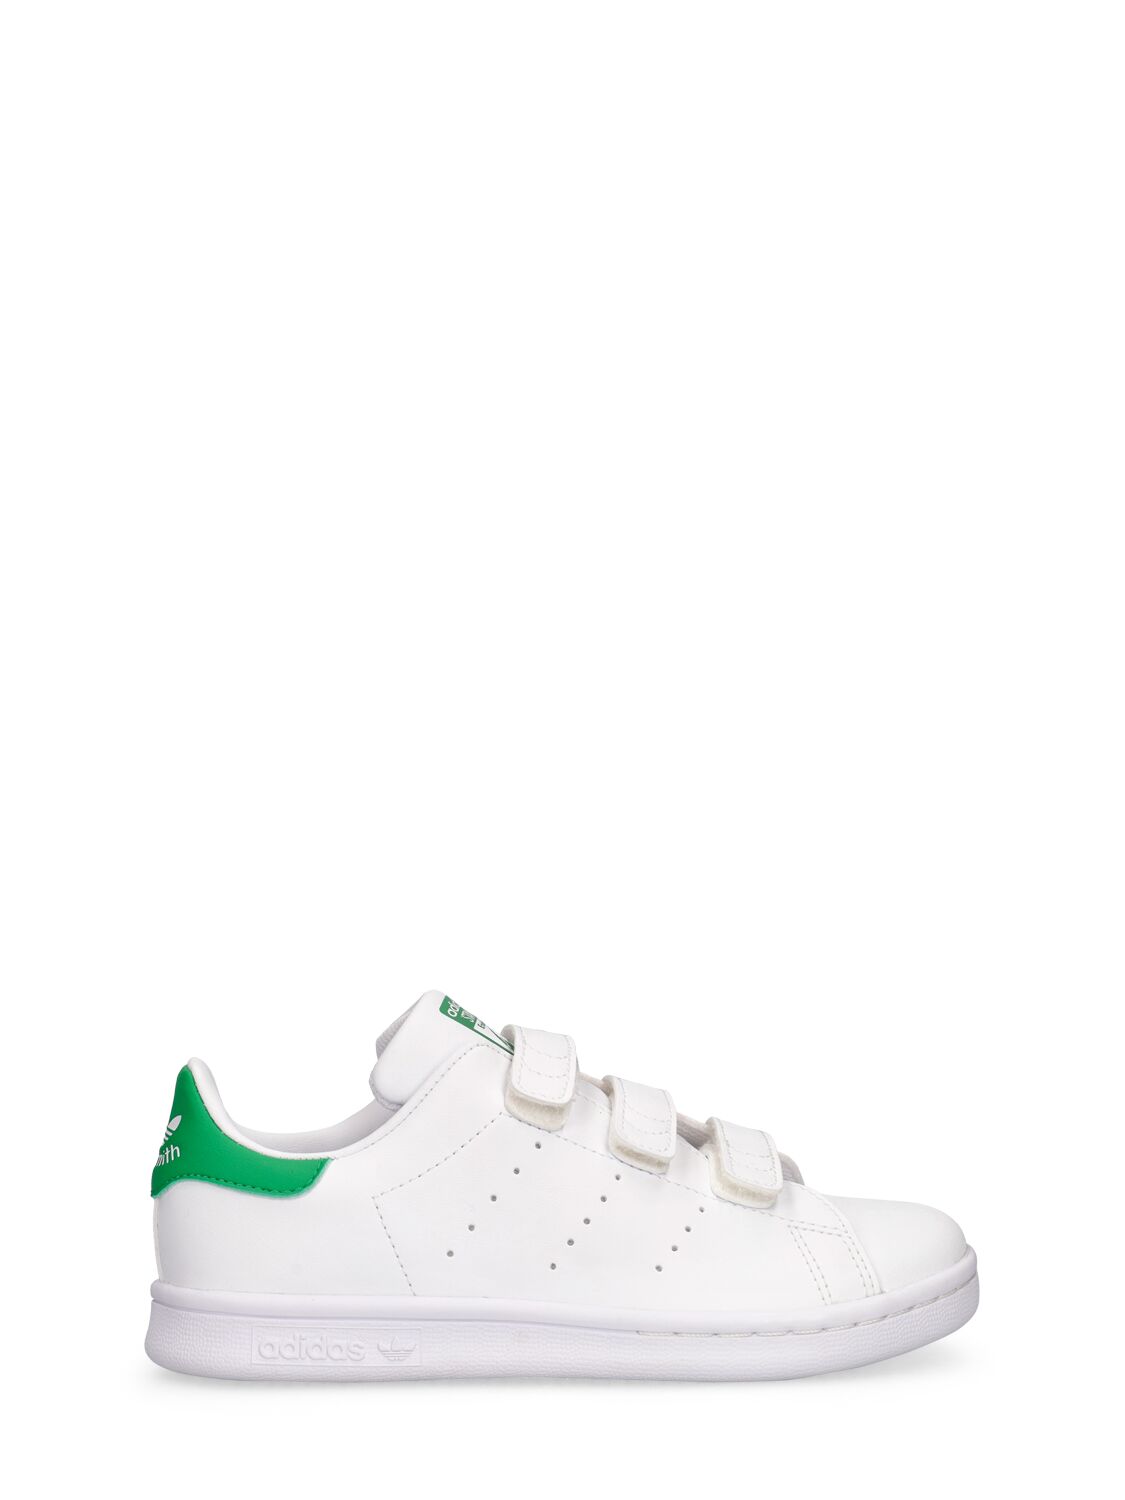 ADIDAS ORIGINALS STAN SMITH RECYCLED POLY BLEND SNEAKERS